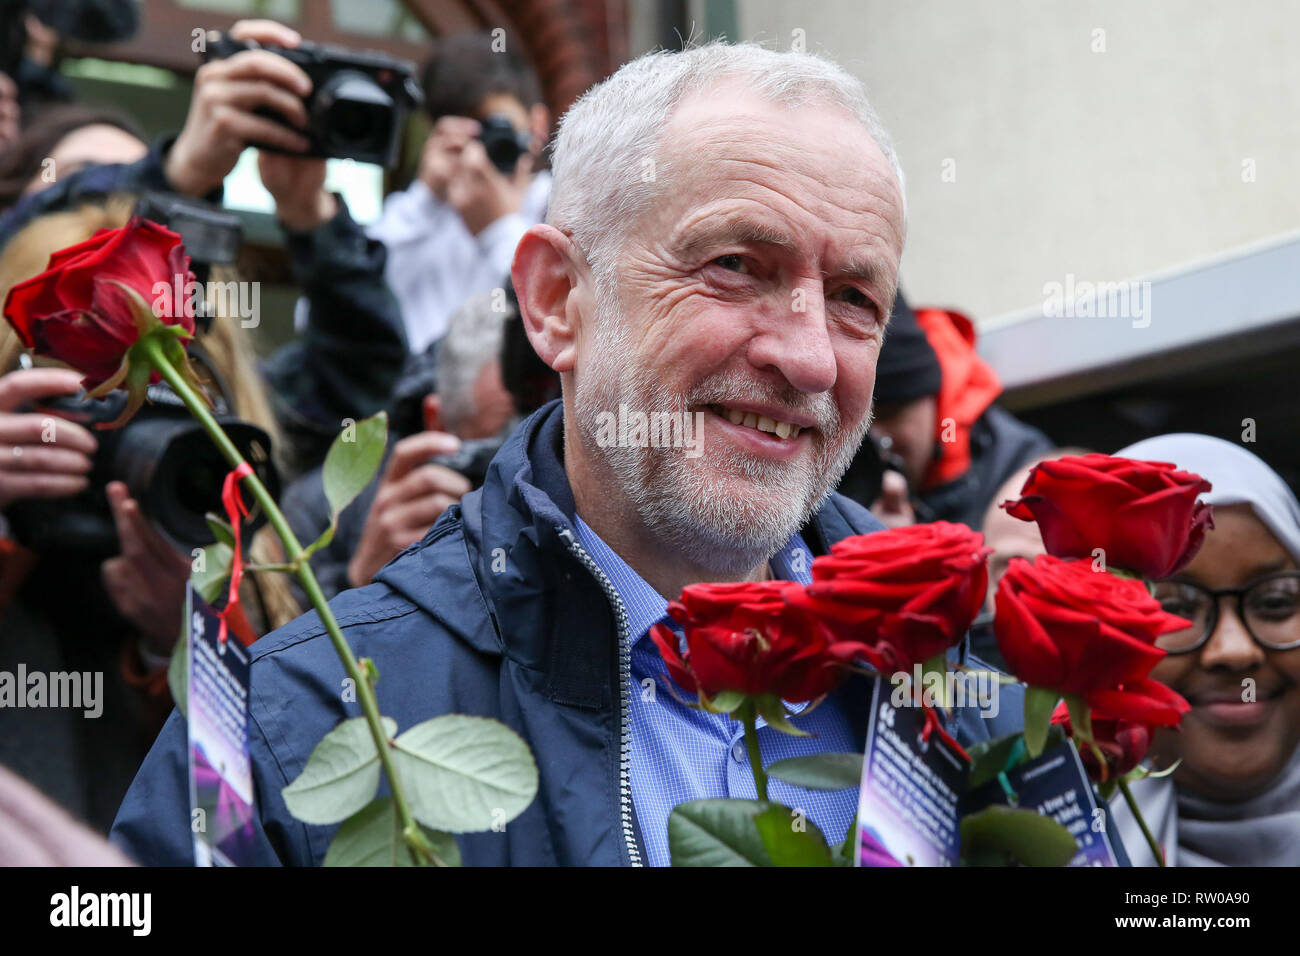 Labour leader Jeremy Corbyn is seen with flowers during the fourth Visit My Mosque Day at Finsbury Park Mosque in North London. Over 250 mosques open their doors to non-Muslim guests and visitors on the fourth Visit My Mosque Day. This year the national event also encourages mosques to support Keep Britain Tidy's Great British Spring Clean campaign with many already taking part in cleaning their communities. Later a man thought to be a pro-Brexit campaigner was arrested after he pressed down an egg on Jeremy Corbyn’s head. Stock Photo